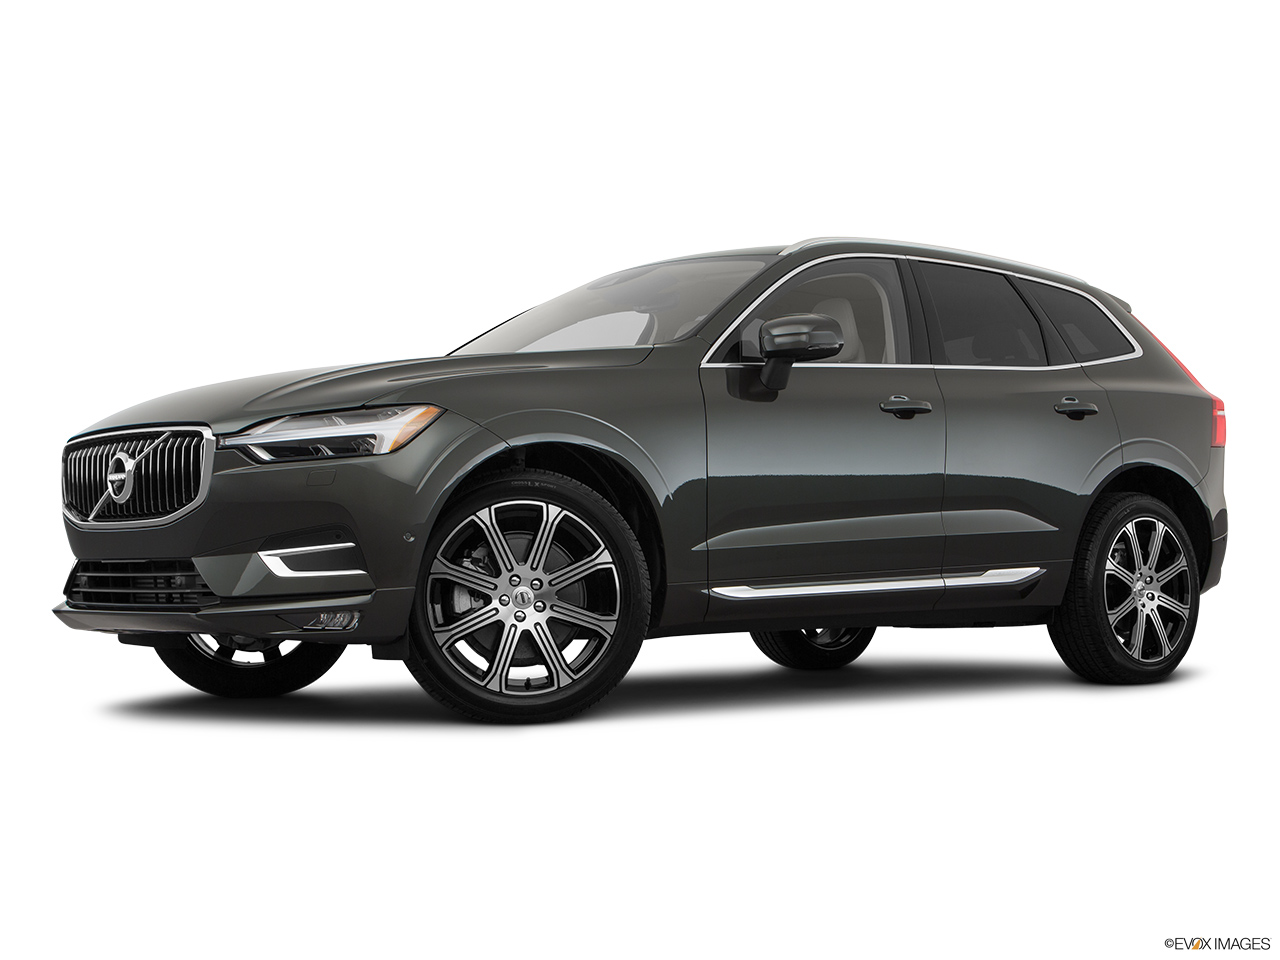 2019 Volvo XC60 T6 Inscription Low/wide front 5/8. 